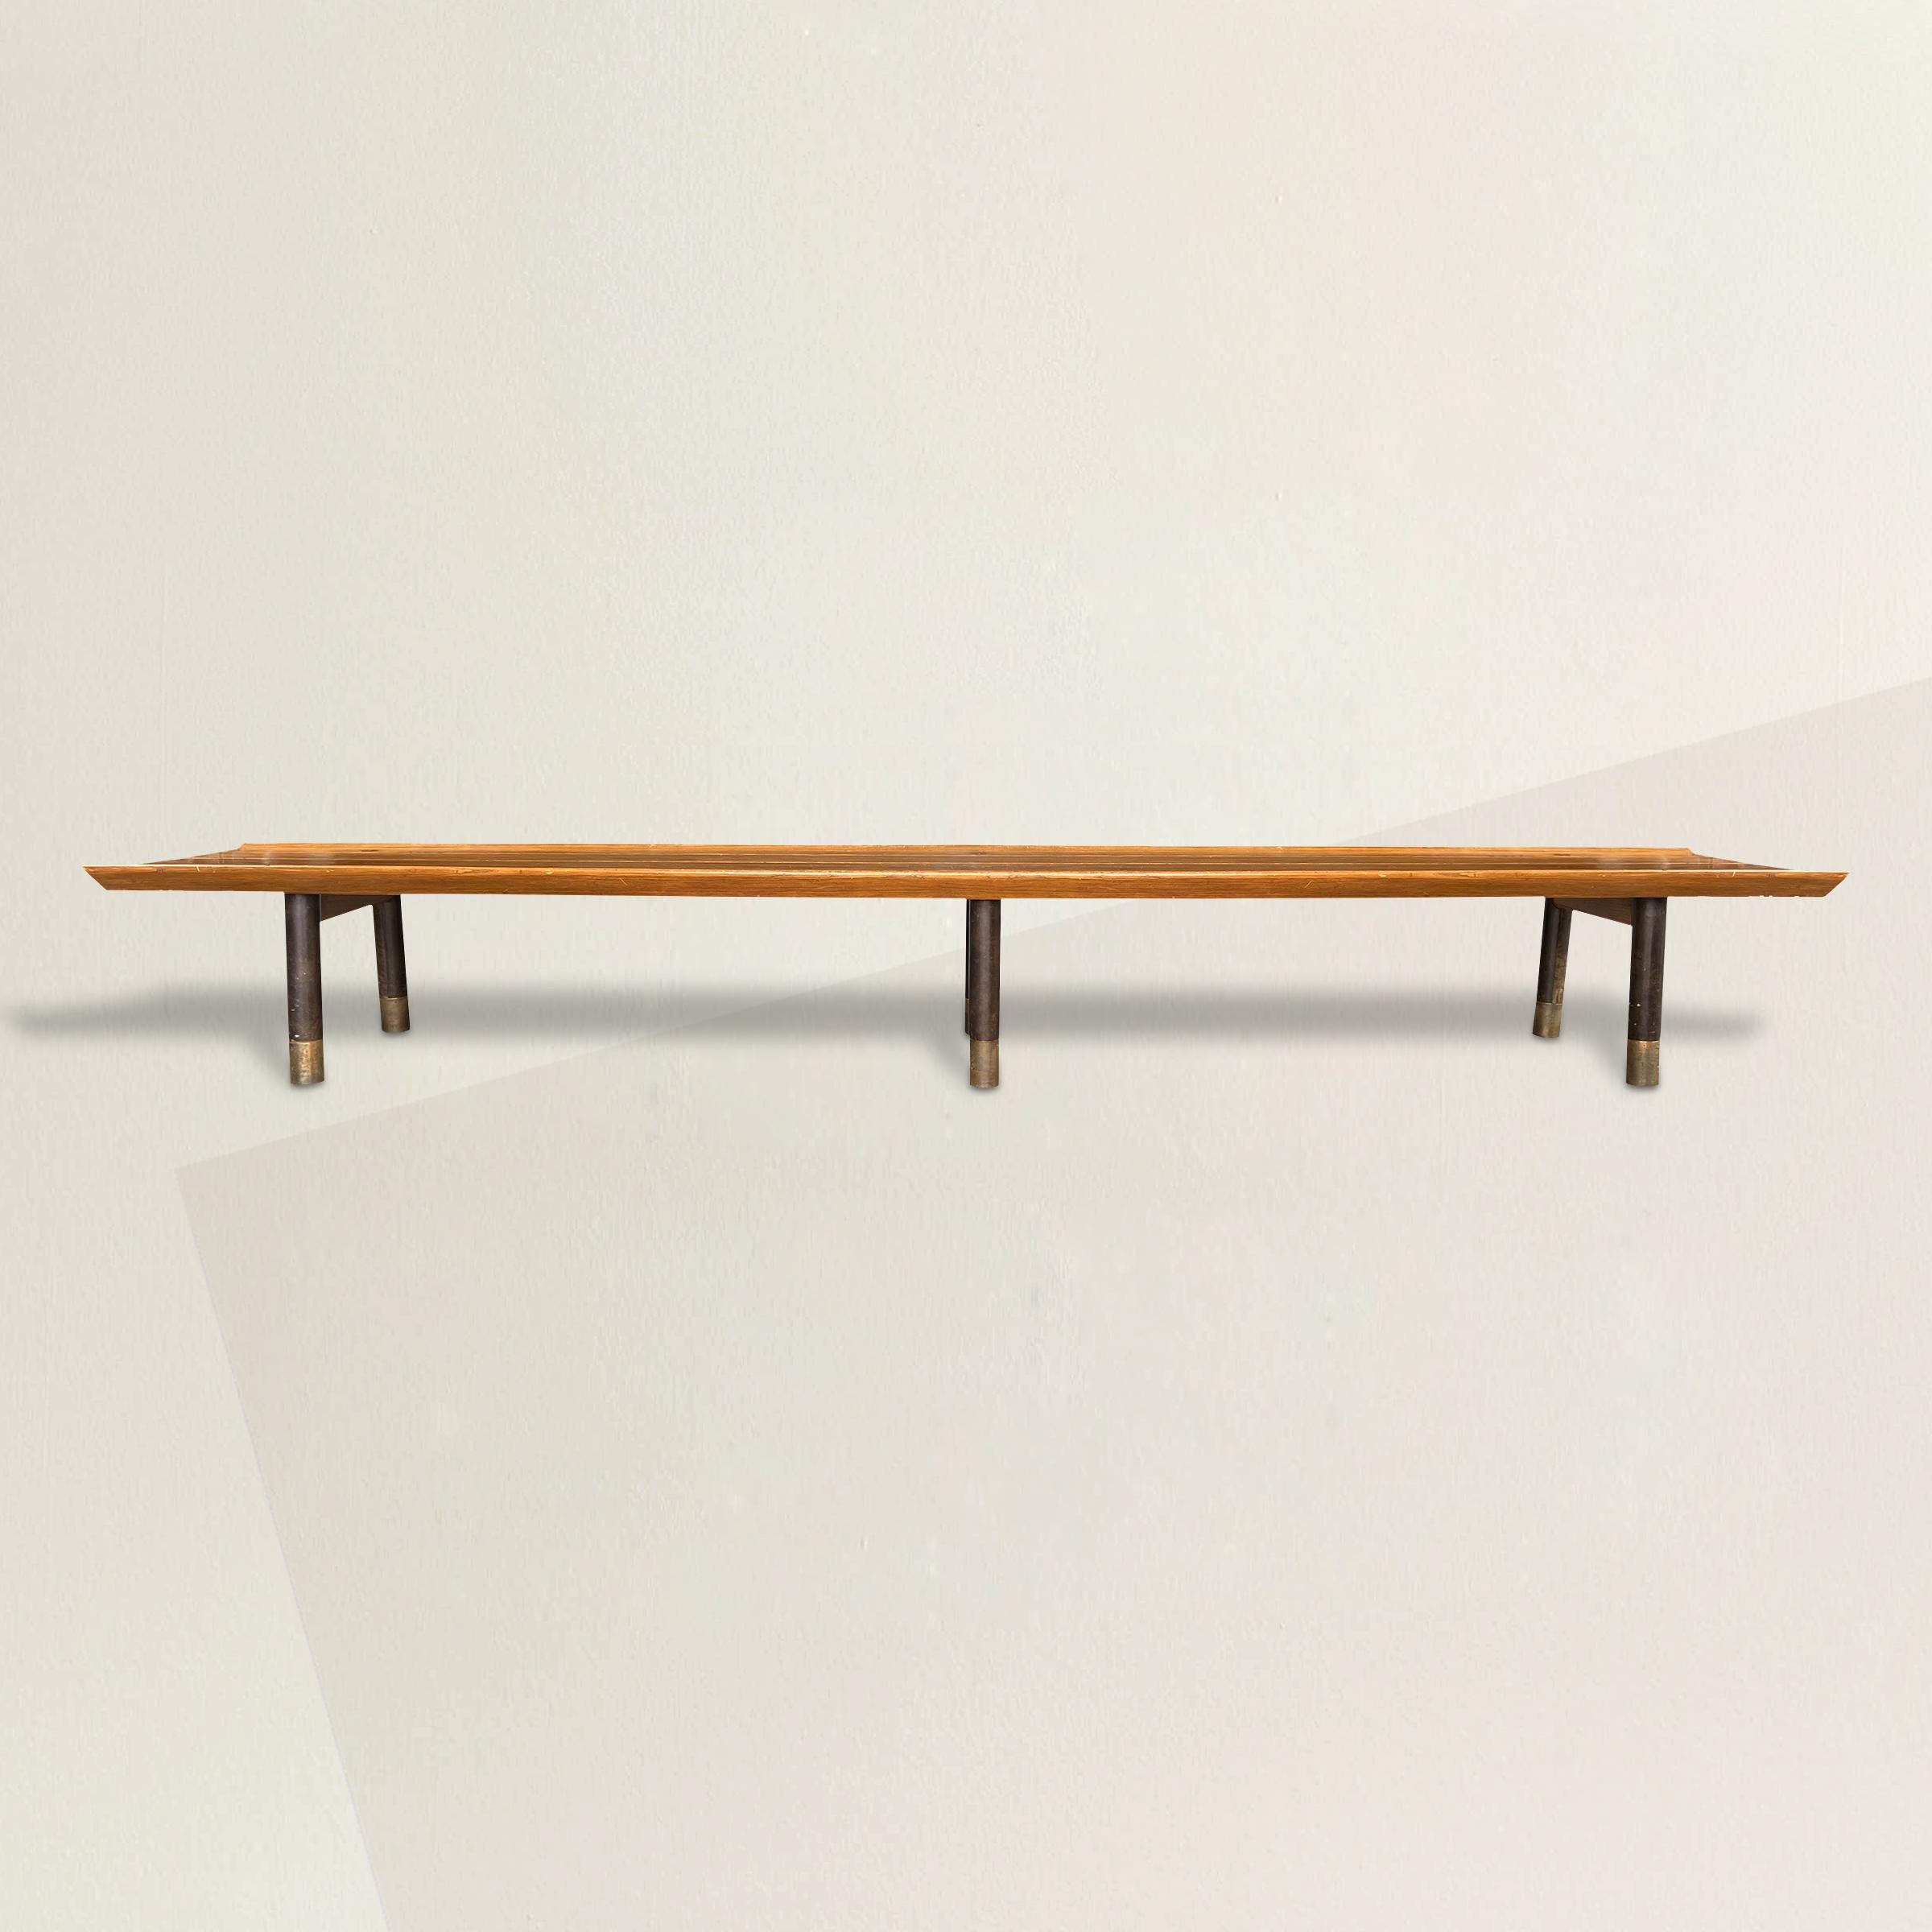 A monumental mid-20th century American hall bench designed by architect Boyd Hill for a private residence built in Lake Forest, IL in 1959. Hill completed several commercial projects, most notably the Aragon Ballroom in Chicago, and did few